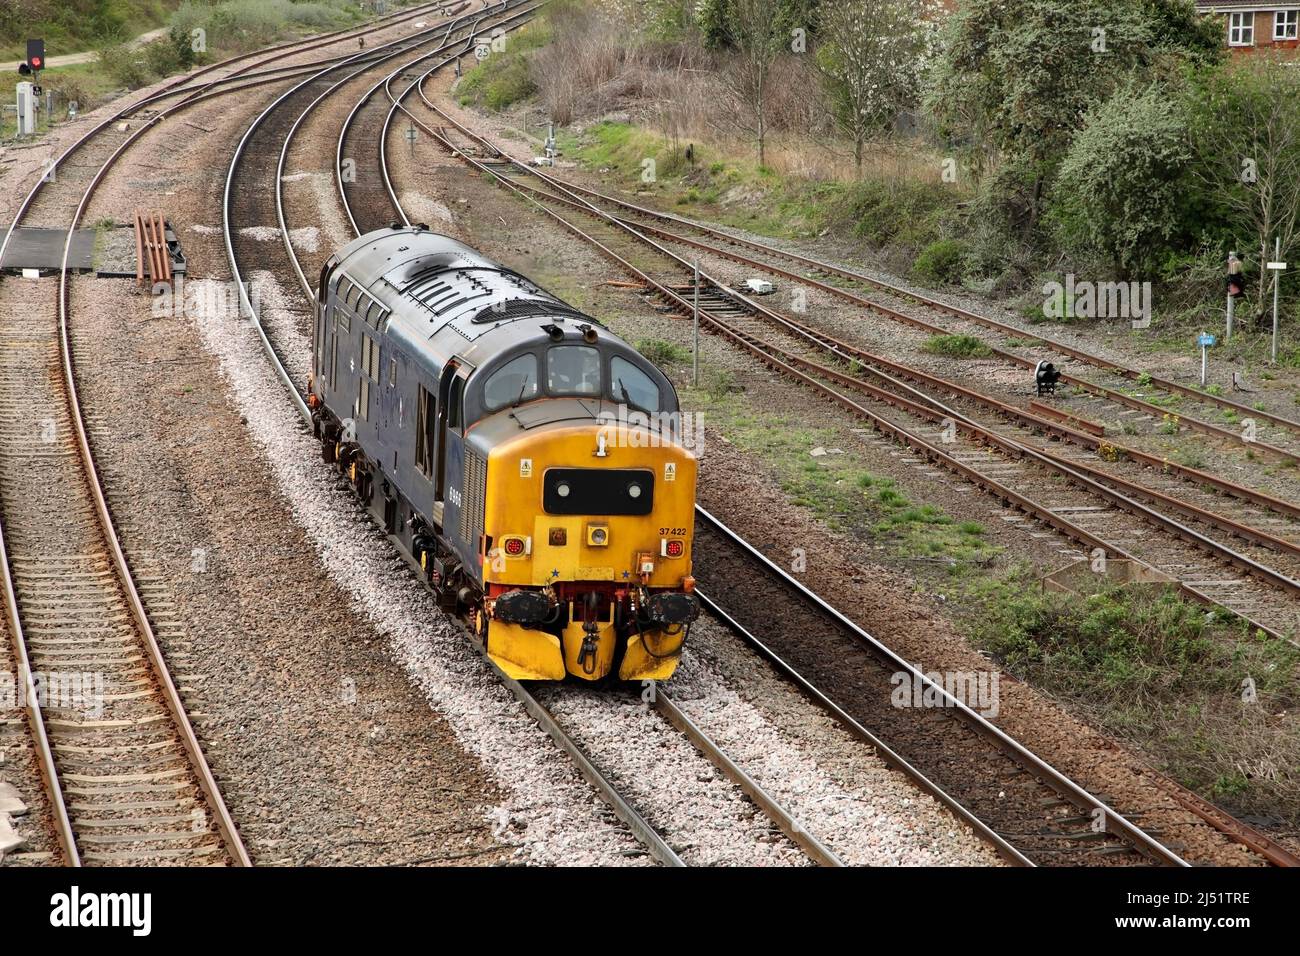 Direct Rail Services Class 37 loco 37422 forms the 1230 Scunthorpe Trent Yard to Doncaster light engine service through Scunthorpe on 19/4/22. Stock Photo